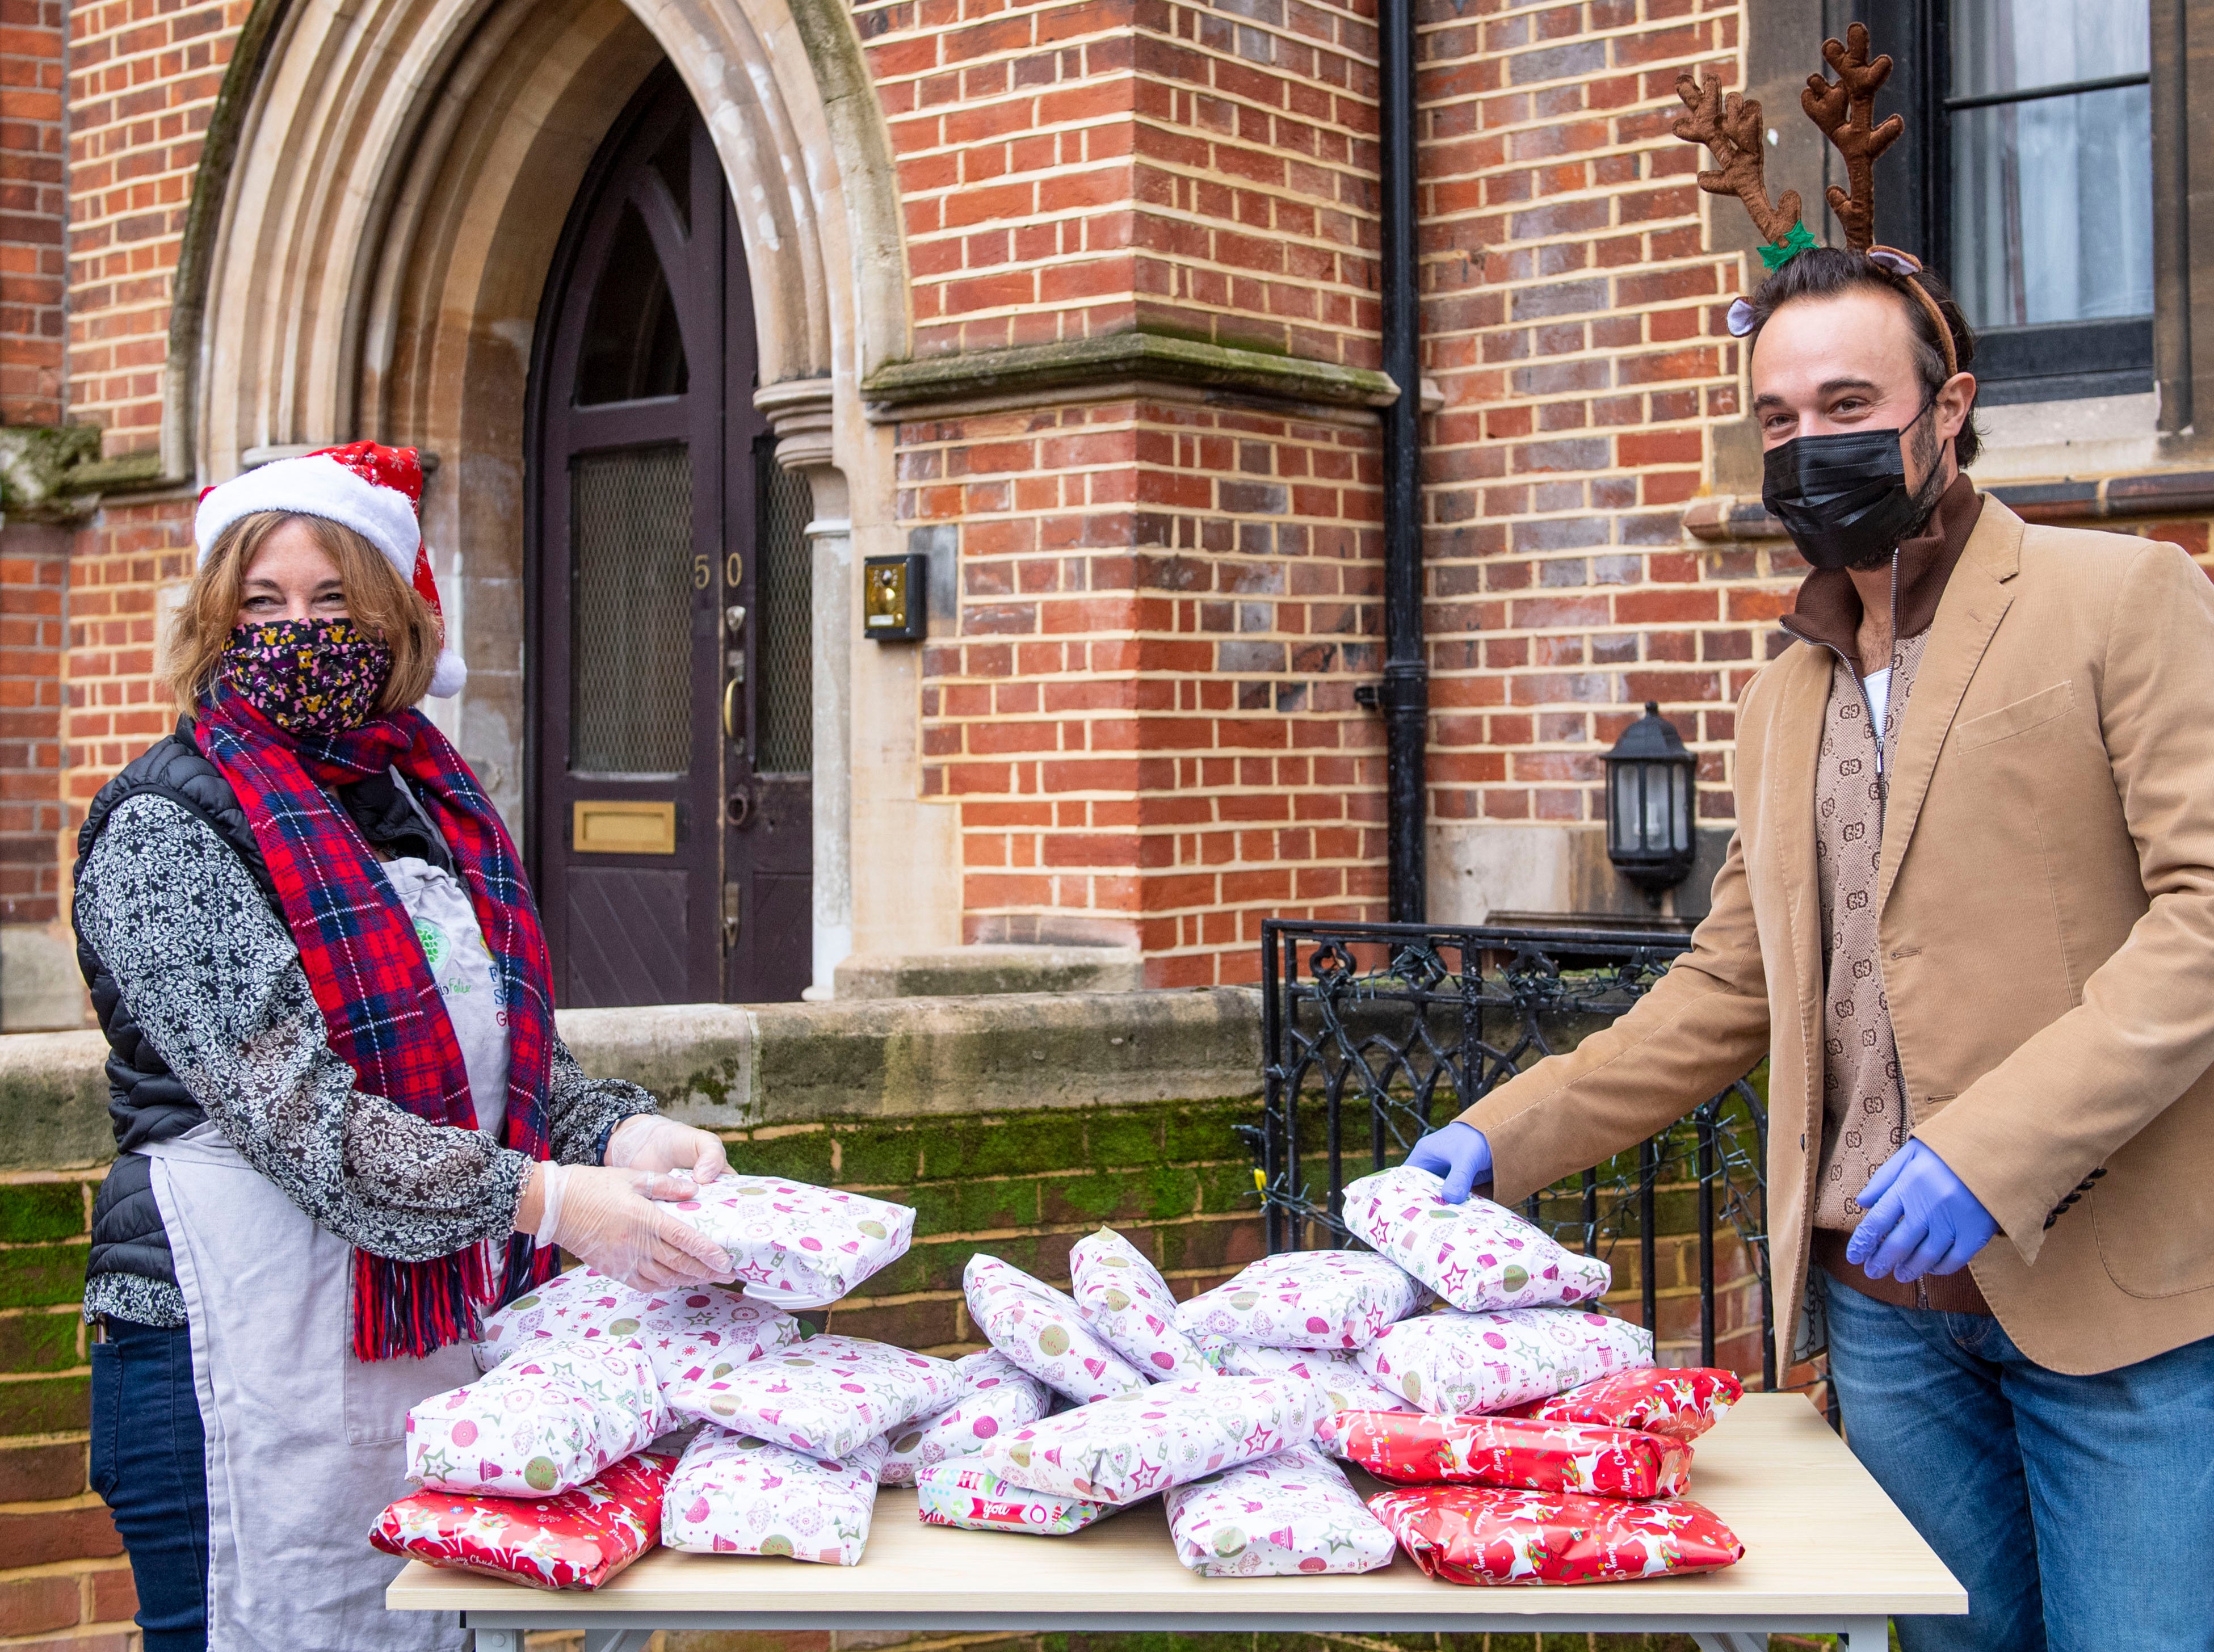 The Independent’s lead shareholder Evgeny Lebedev joins Refettorio Felix’s volunteers to hand out gifts and food to vulnerable people